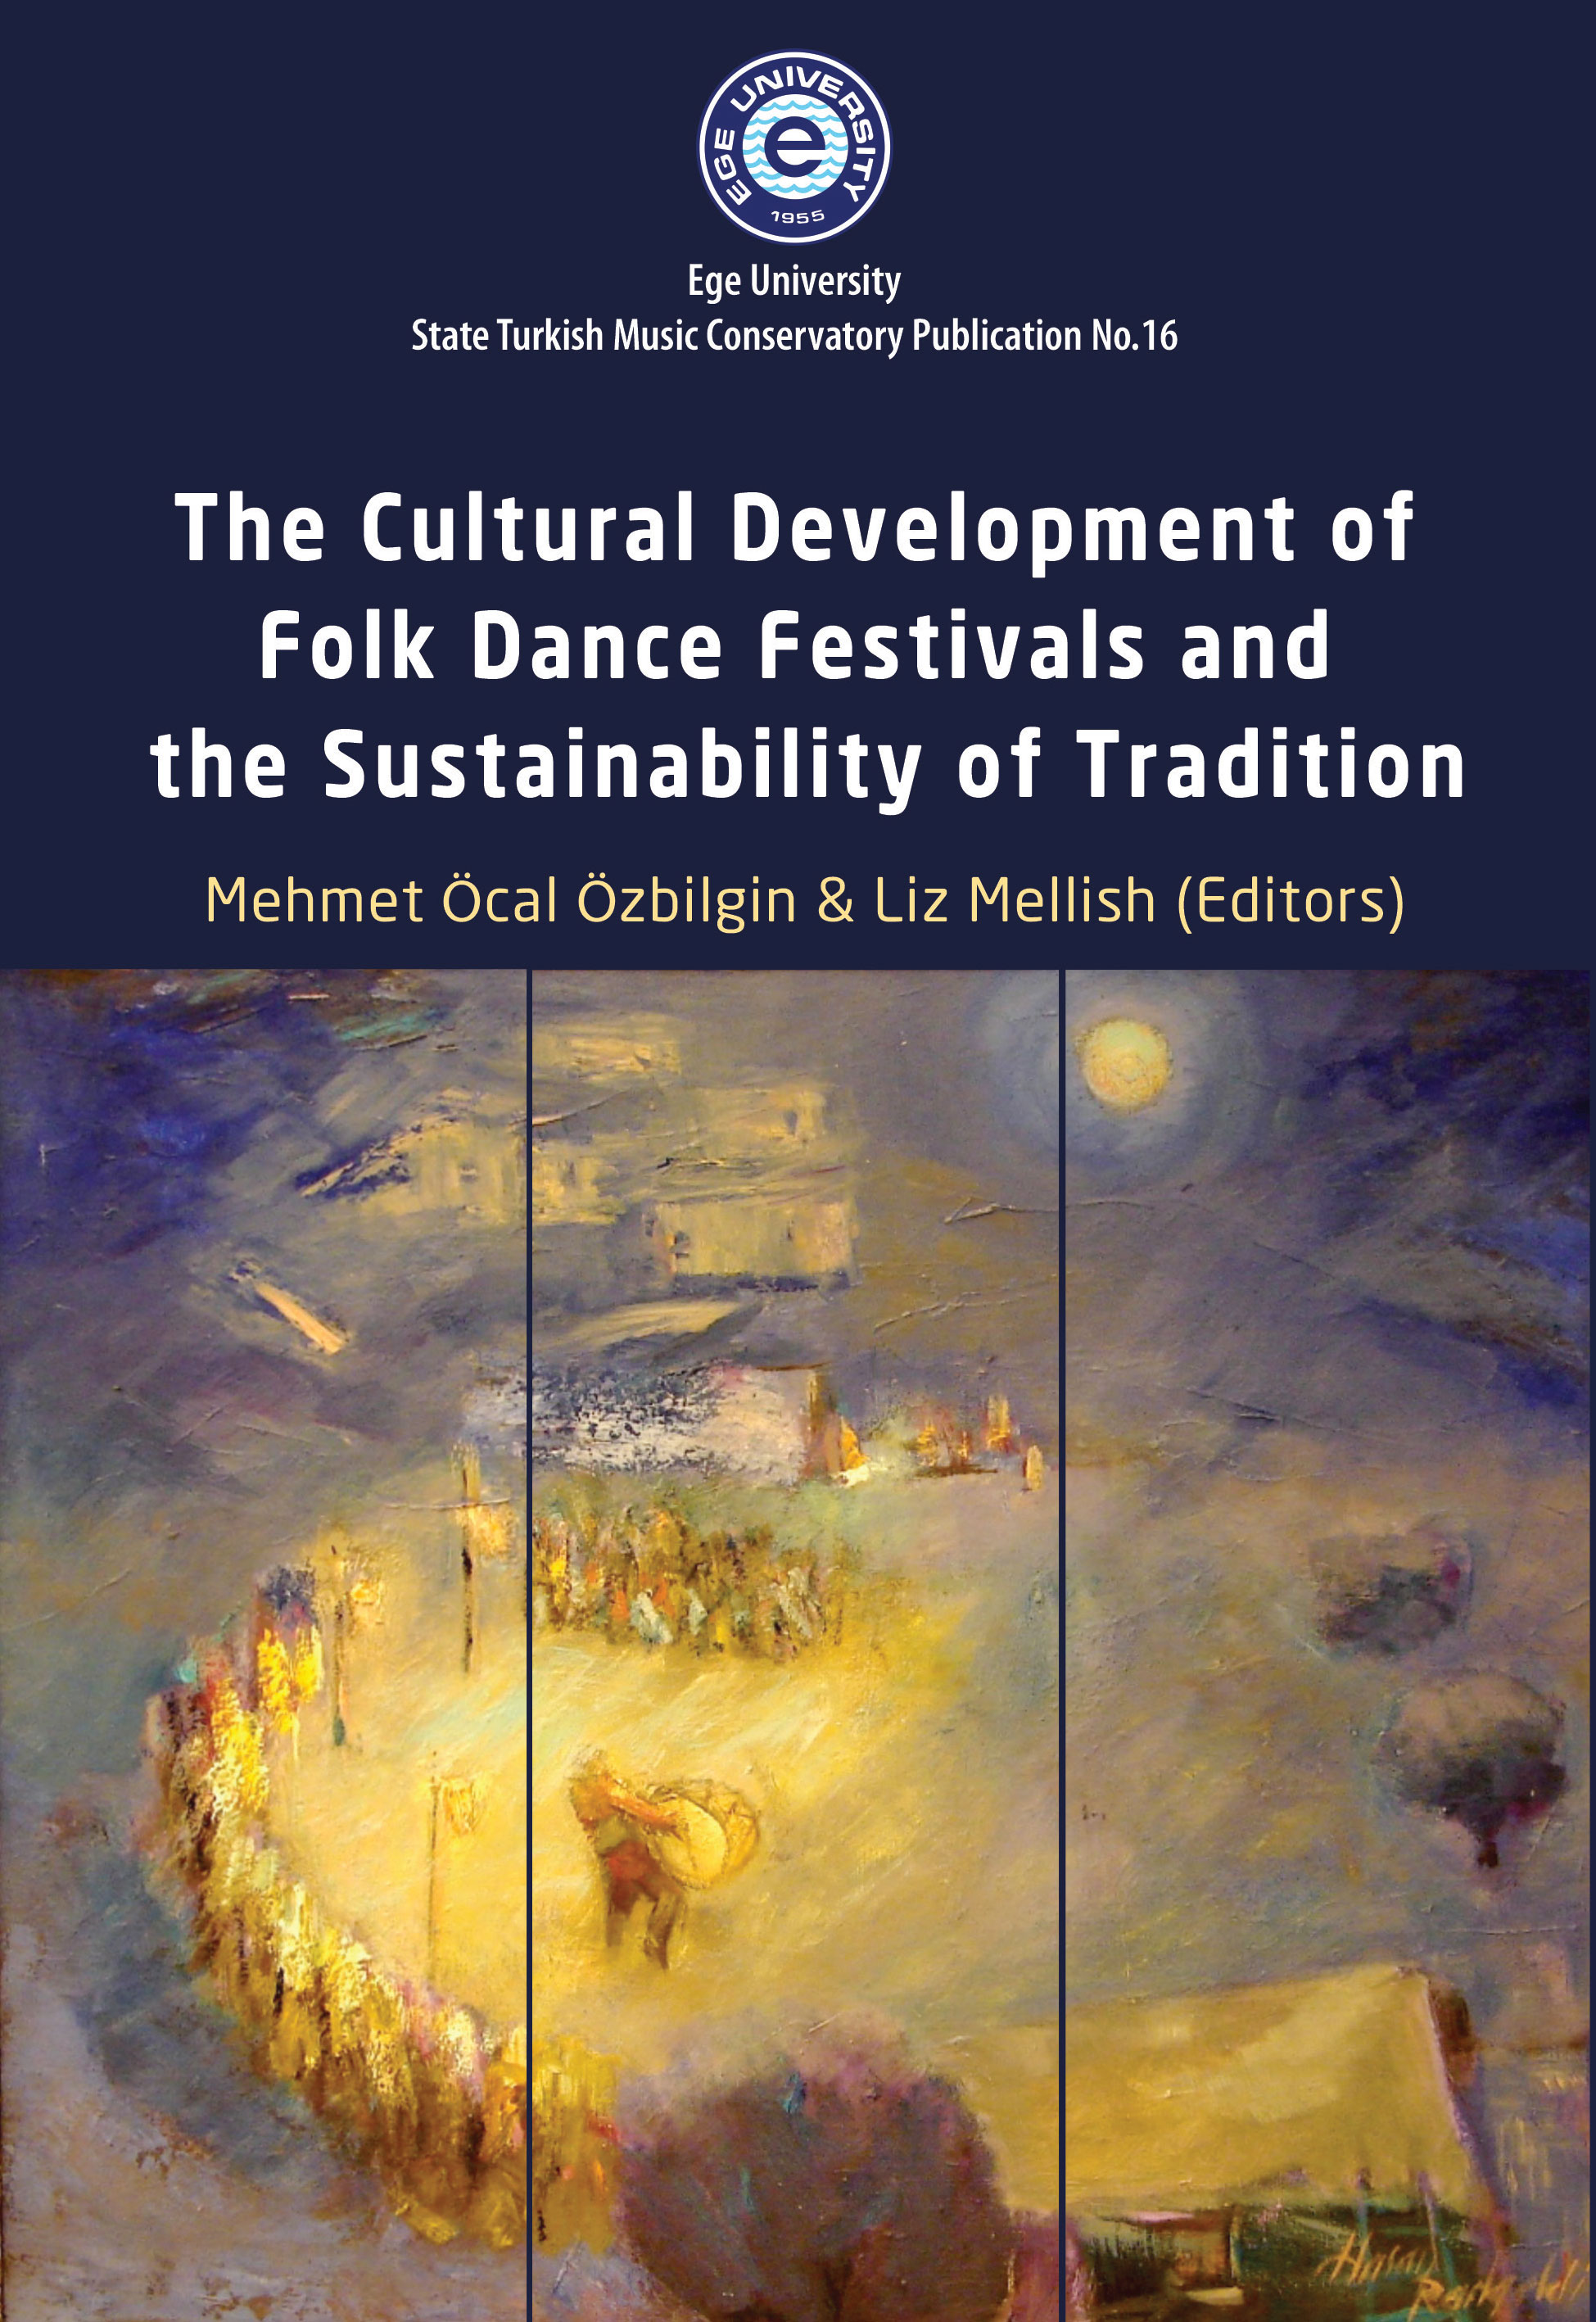 The Cultural Development of Folk Dance Festivals and the Sustainability of Tradition